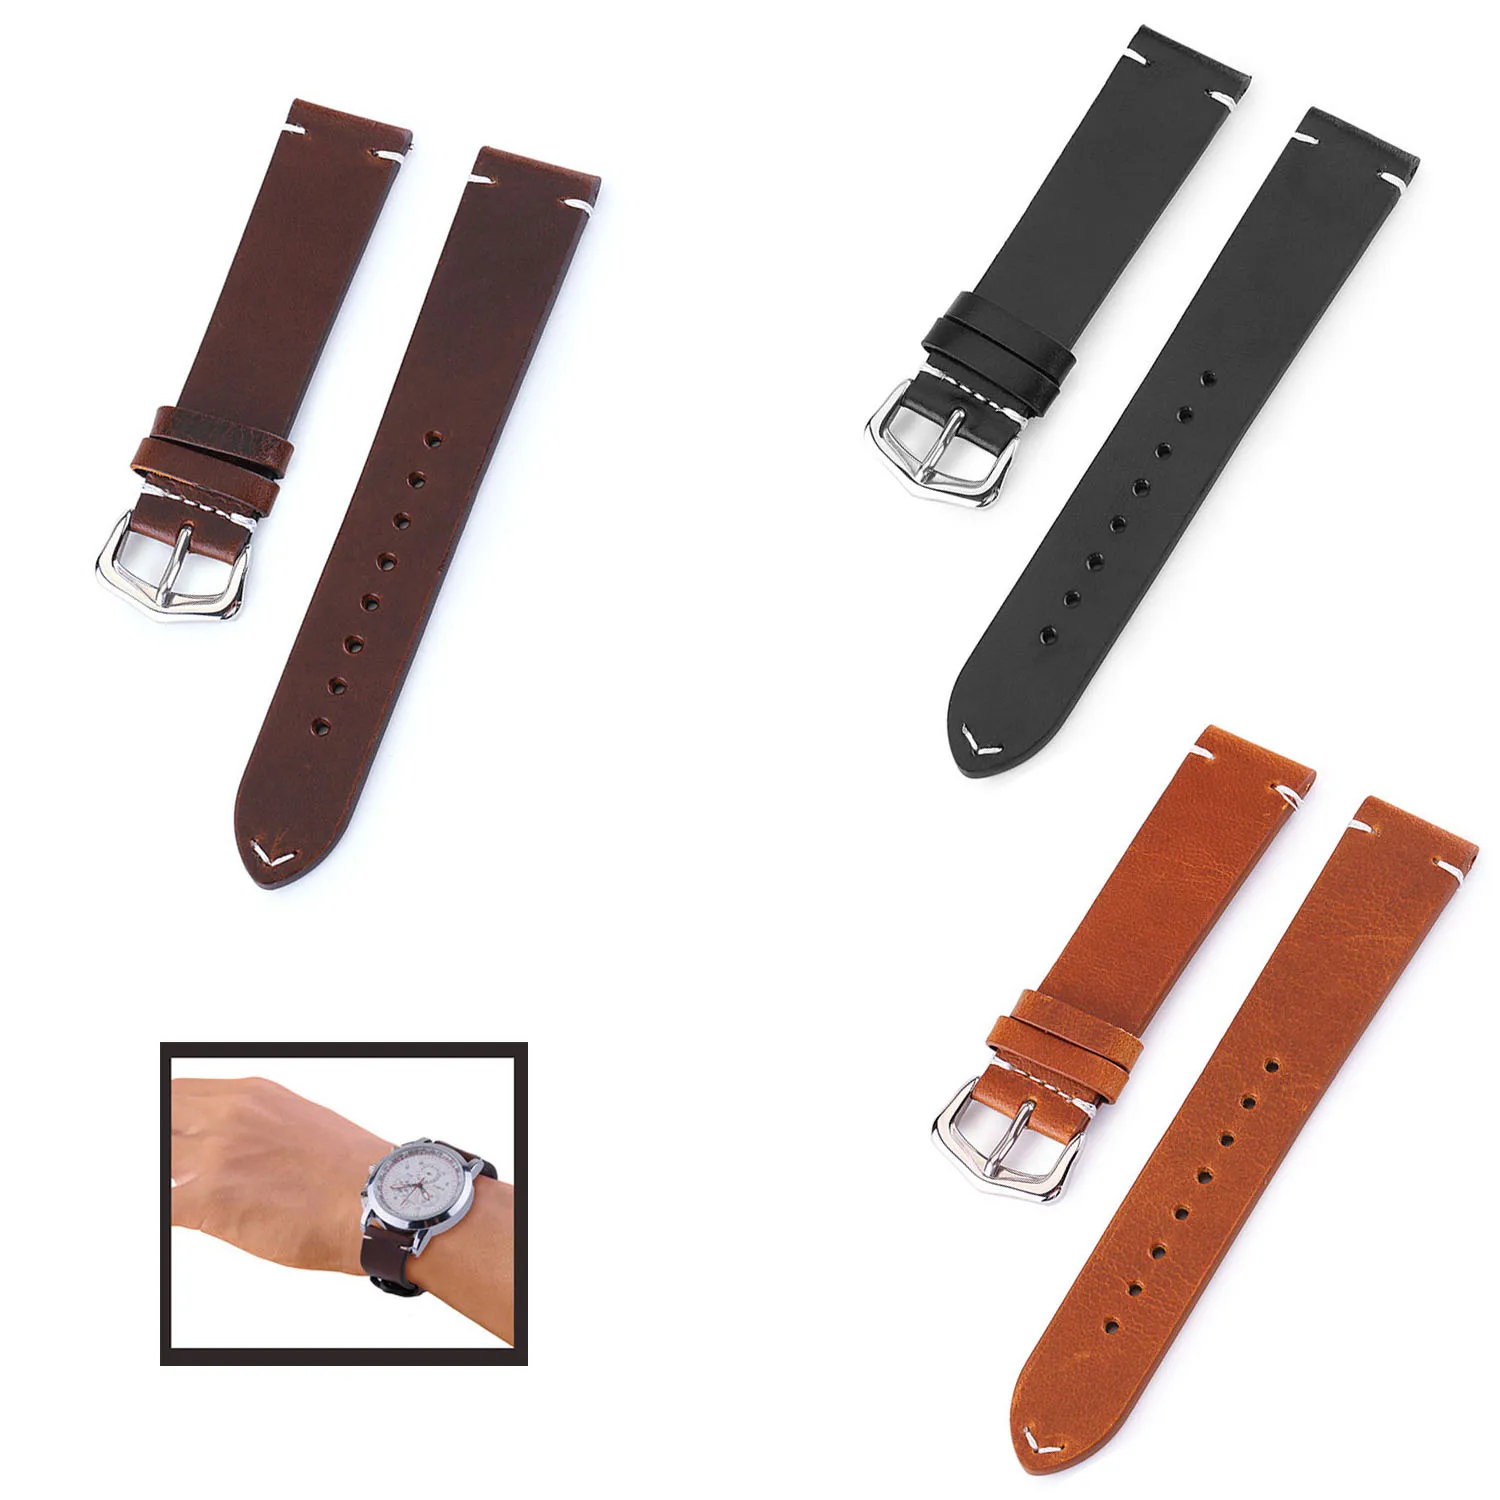 

Retro Leather Watch Strap 18mm 19mm 20mm 21mm 22mm 24mm Wrist Belt Watchbands Genuine Leather Watch Band Black Brown with Pins